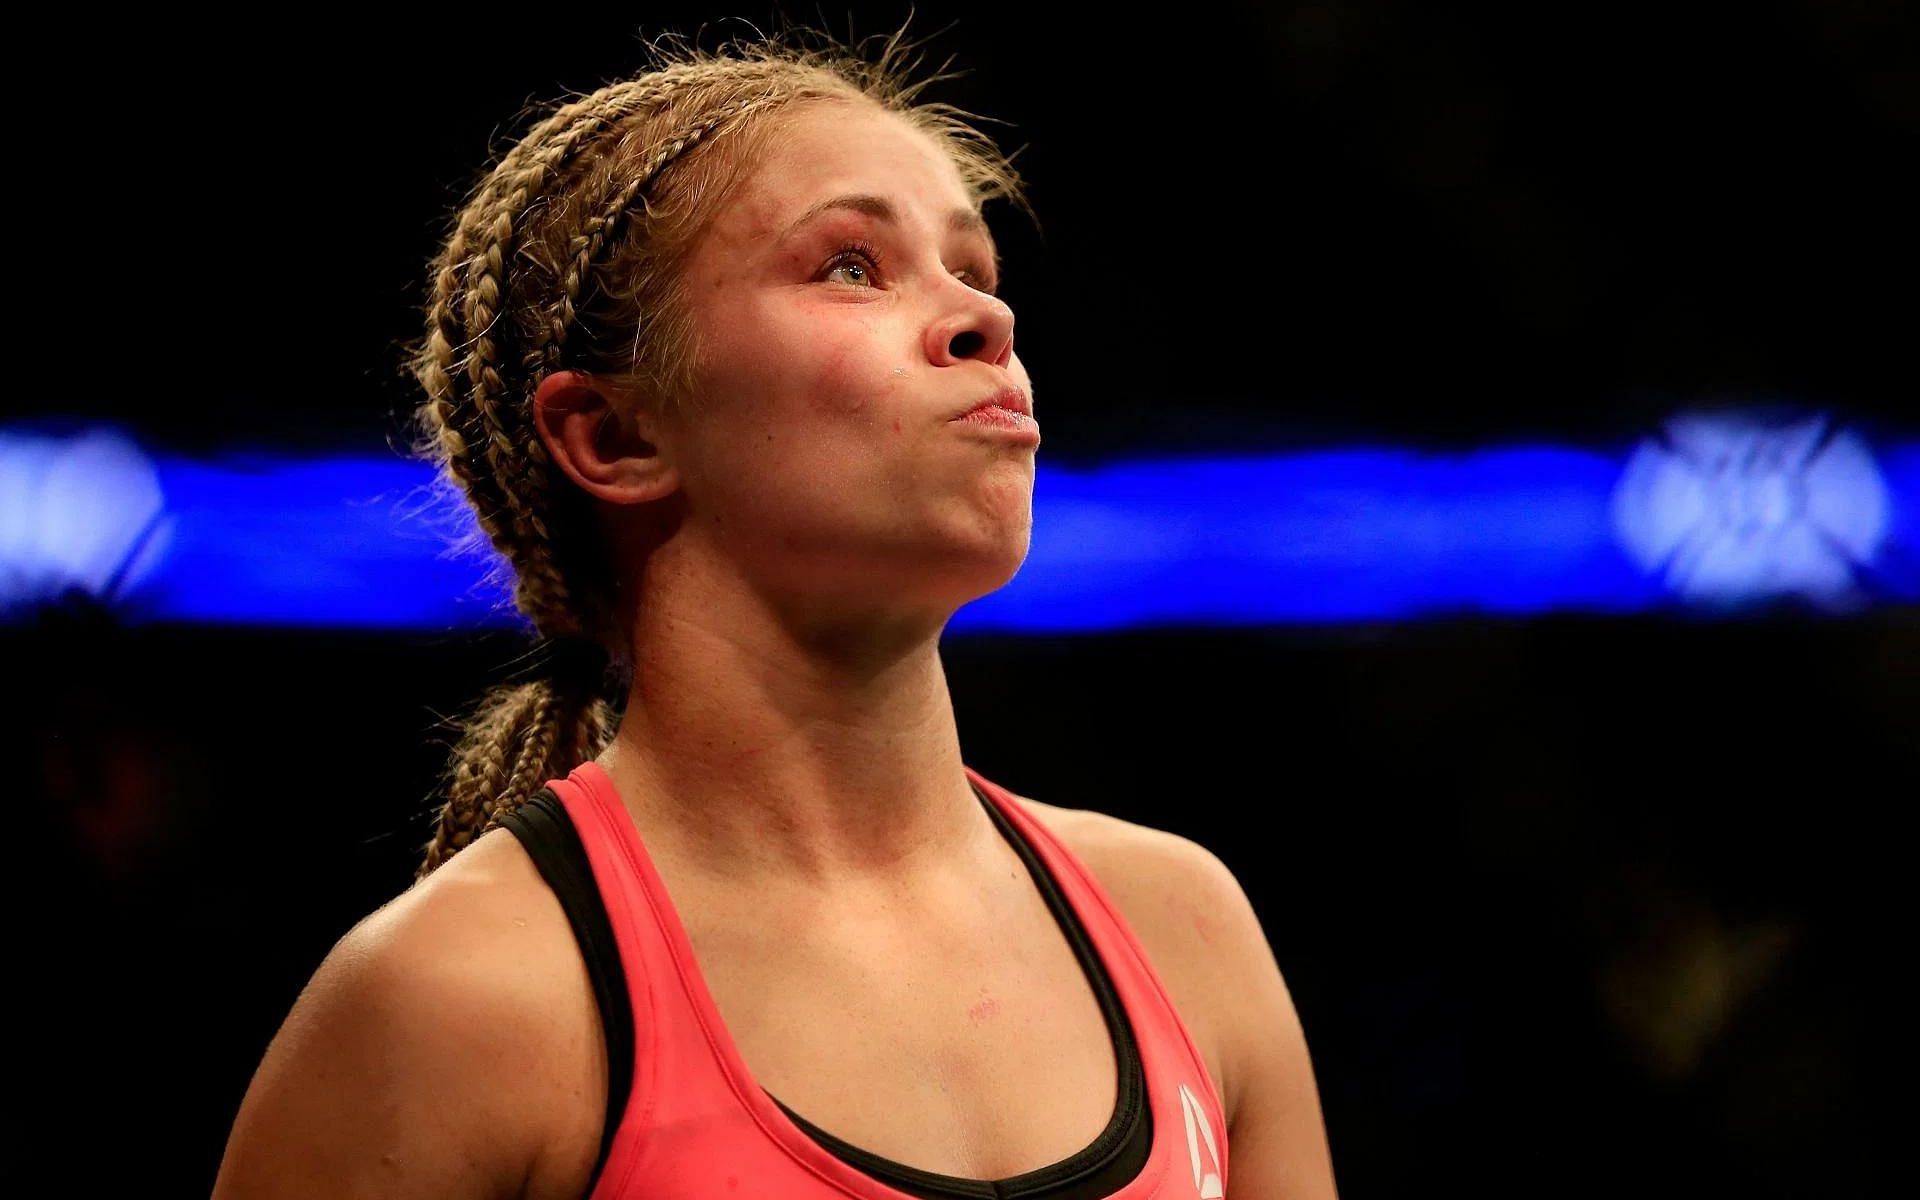 Paige VanZant competed at MIsfits Boxing 15 [Image via Getty]